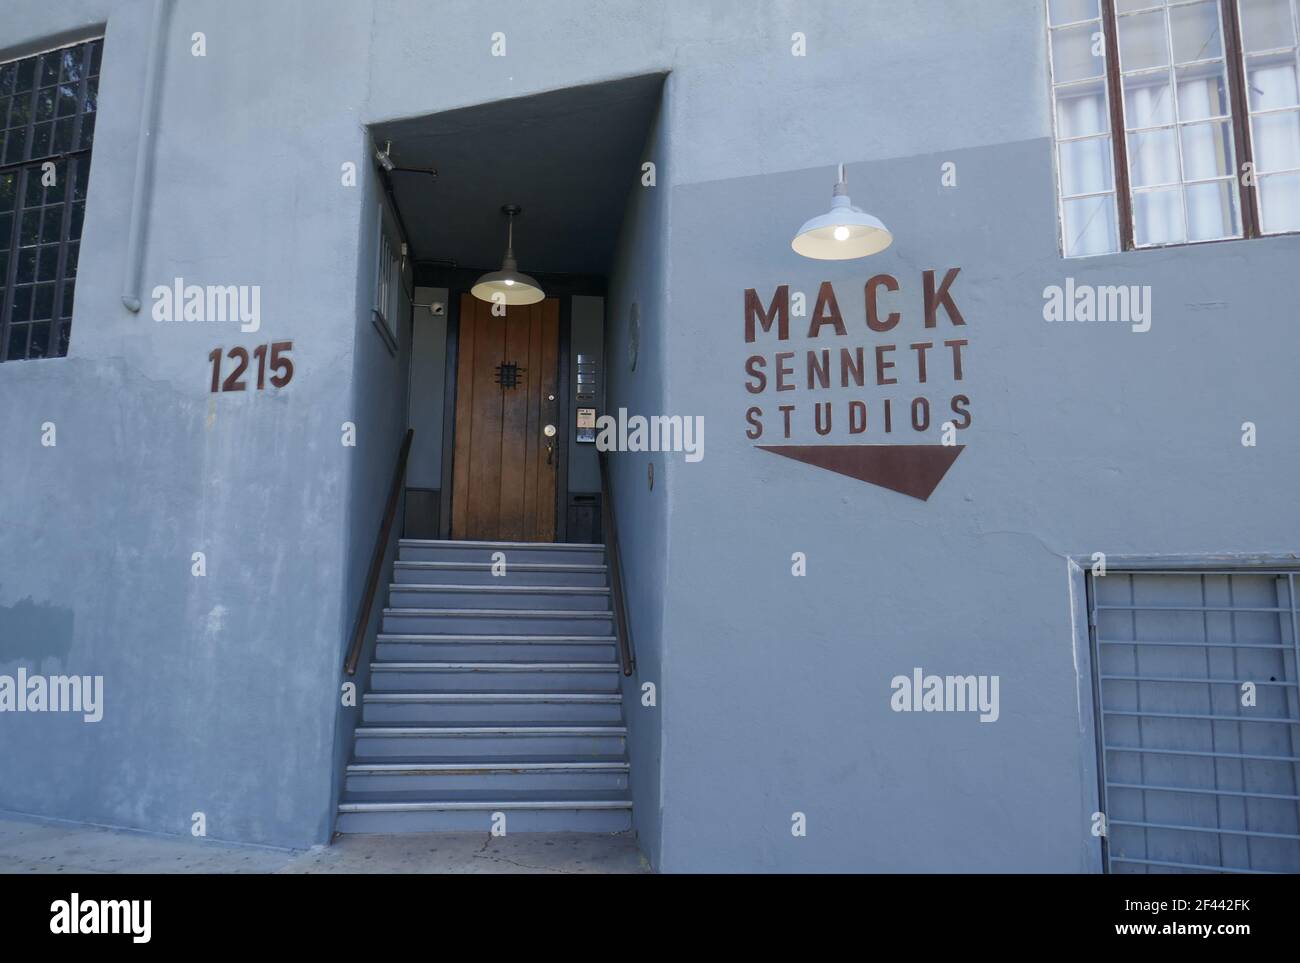 Los Angeles, California, USA 18th March 2021 A general view of atmosphere of Mack Sennett Studios at 1215 Bates Avenue in Los Angeles, California, USA. Photo by Barry King/Alamy Stock Photo Stock Photo